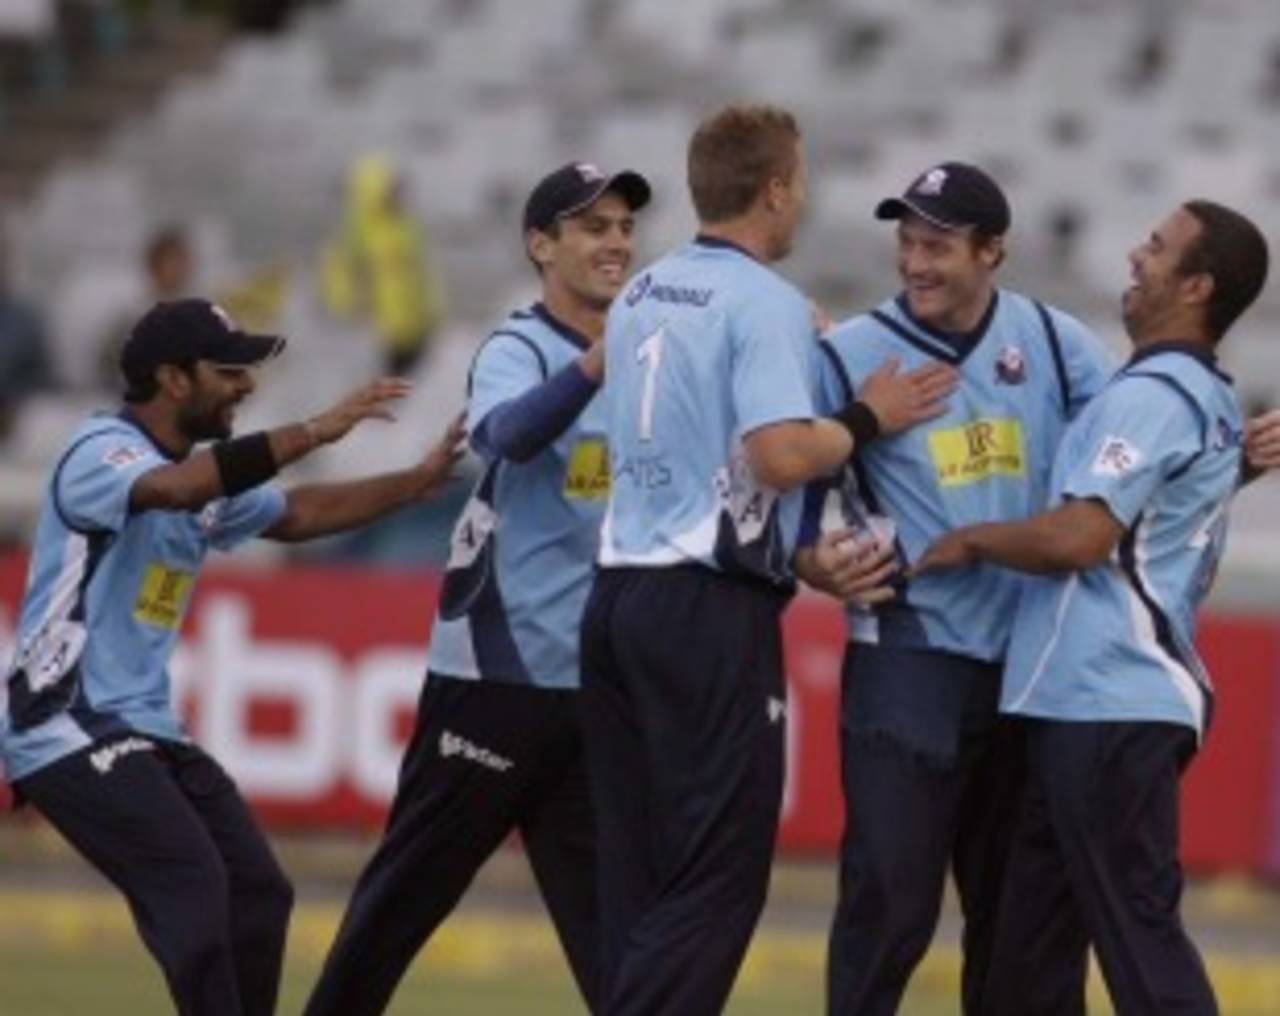 Martin Guptill is congratulated by his team-mates after he took a catch to dismiss Gautam Gambhir, Auckland v Kolkata Knight Riders, Group A, Champions League Twenty20, Cape Town, October 15, 2012